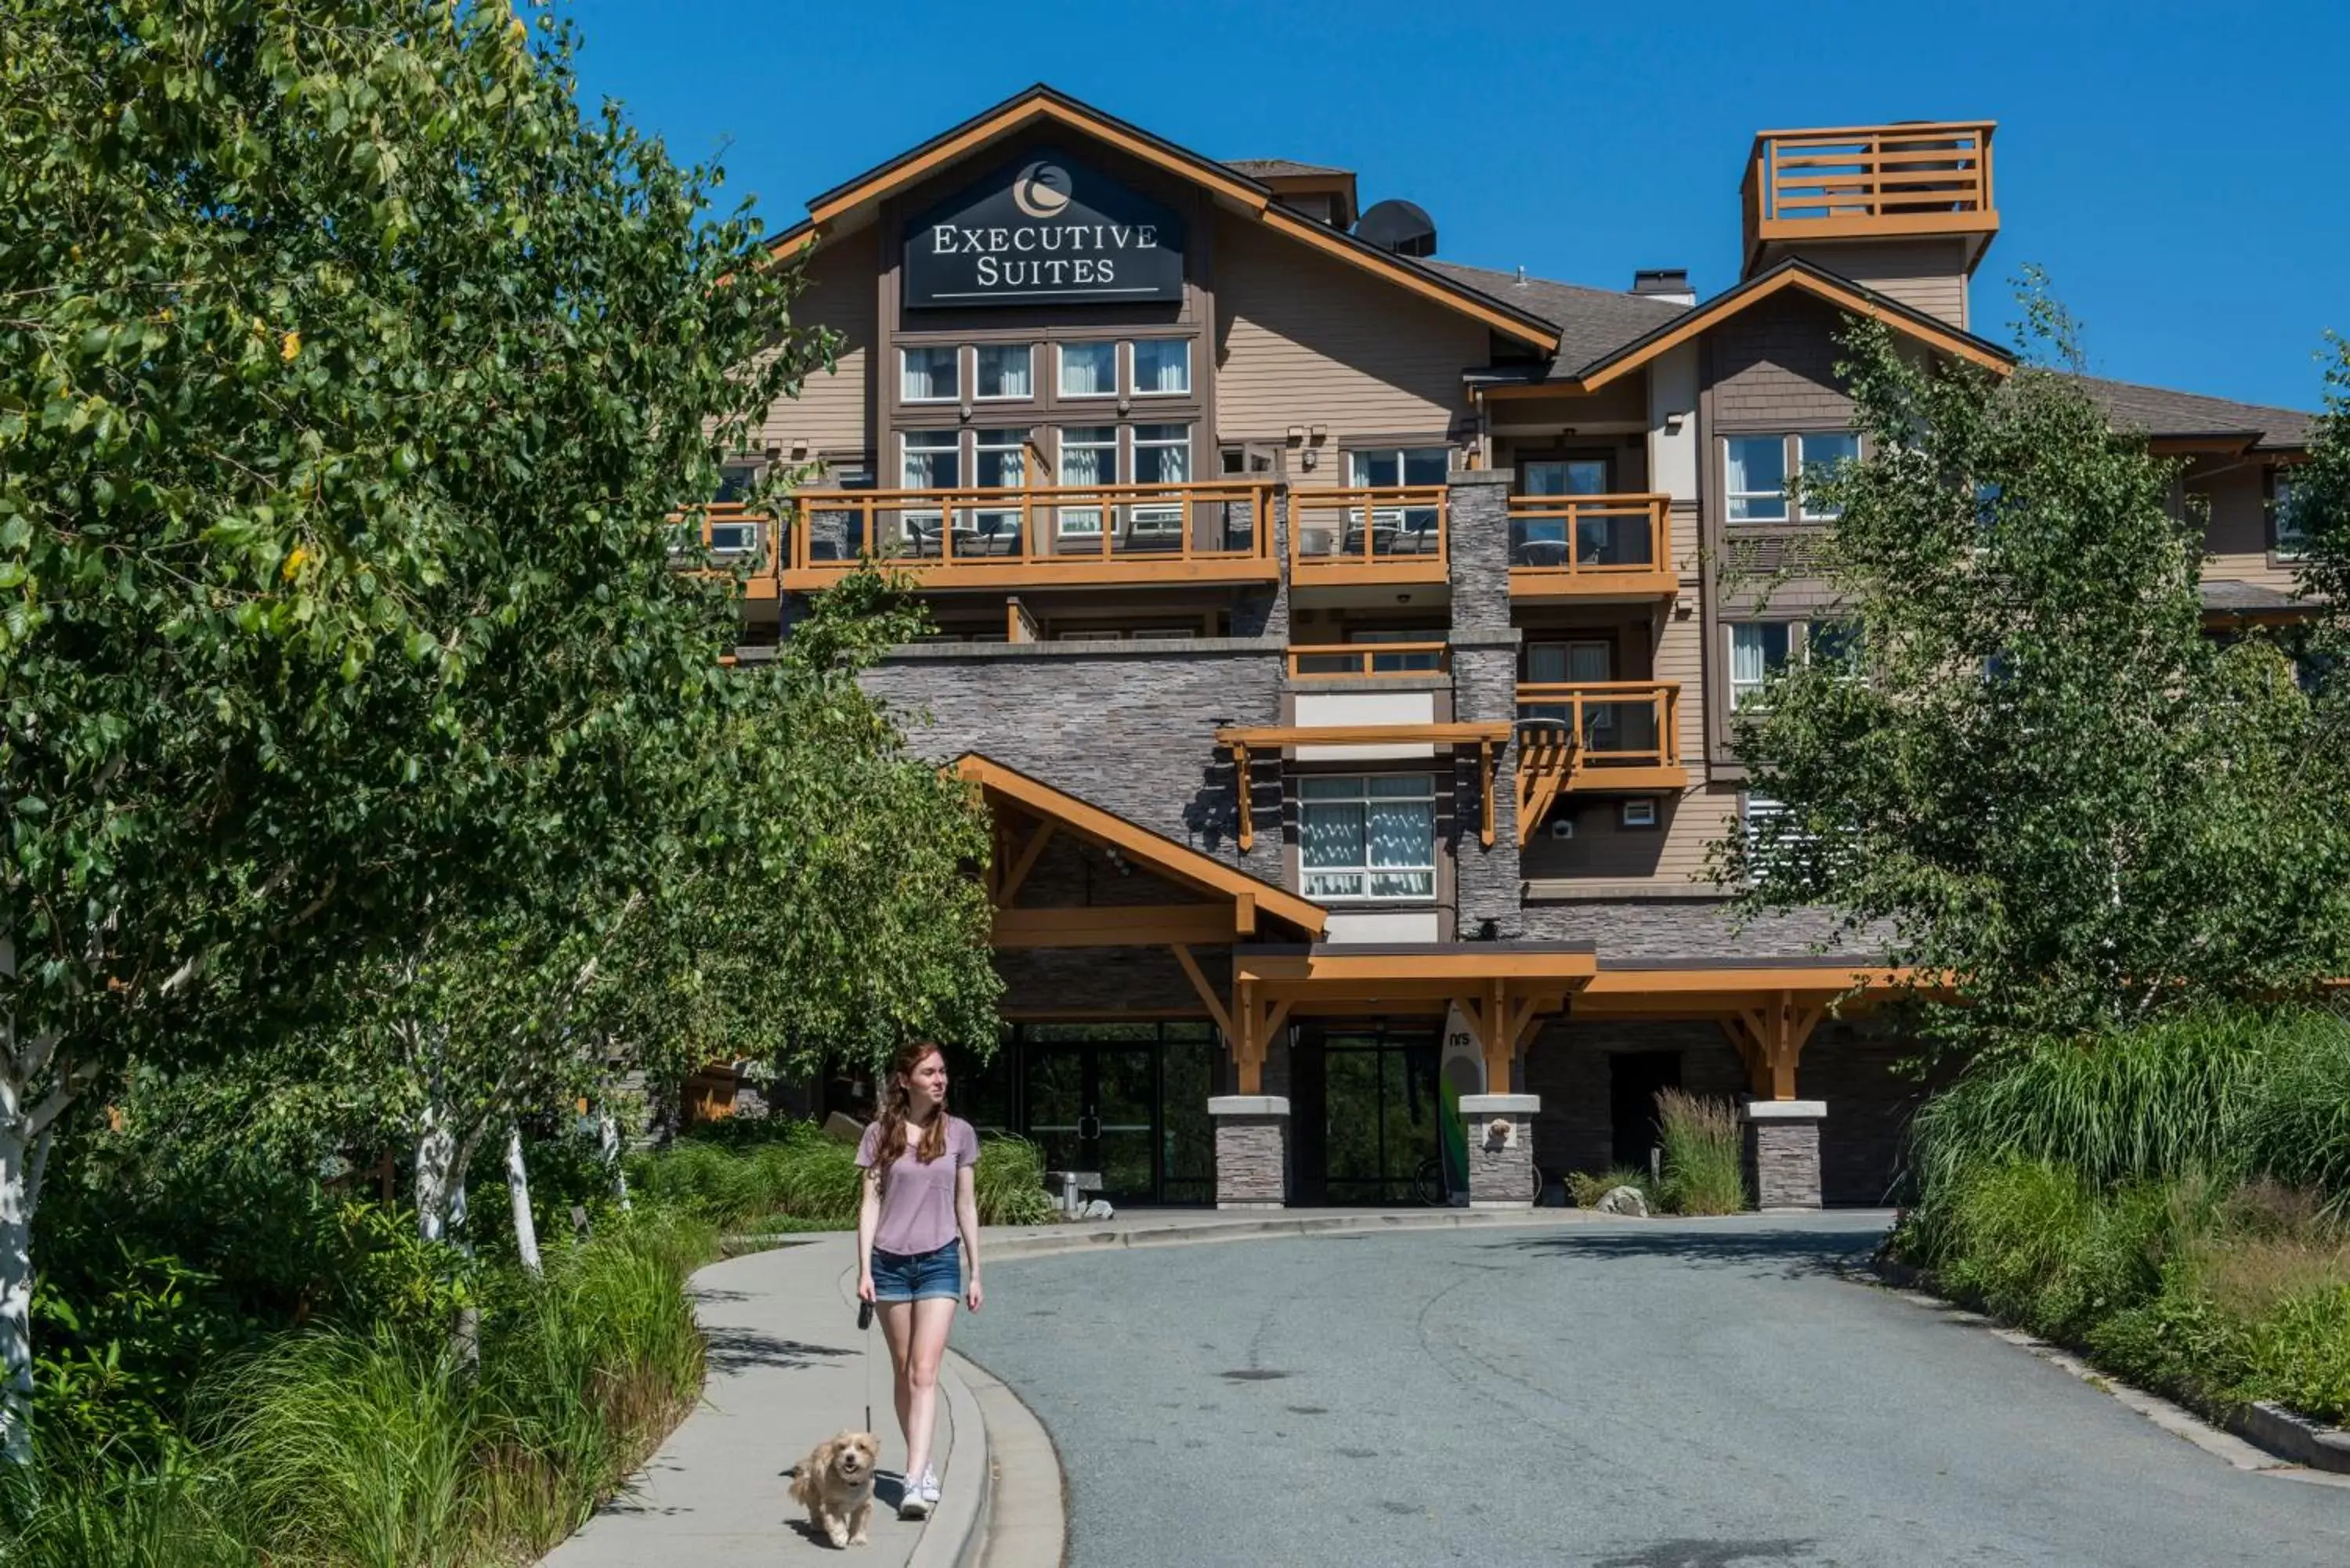 Property Building in Executive Suites Hotel and Resort, Squamish